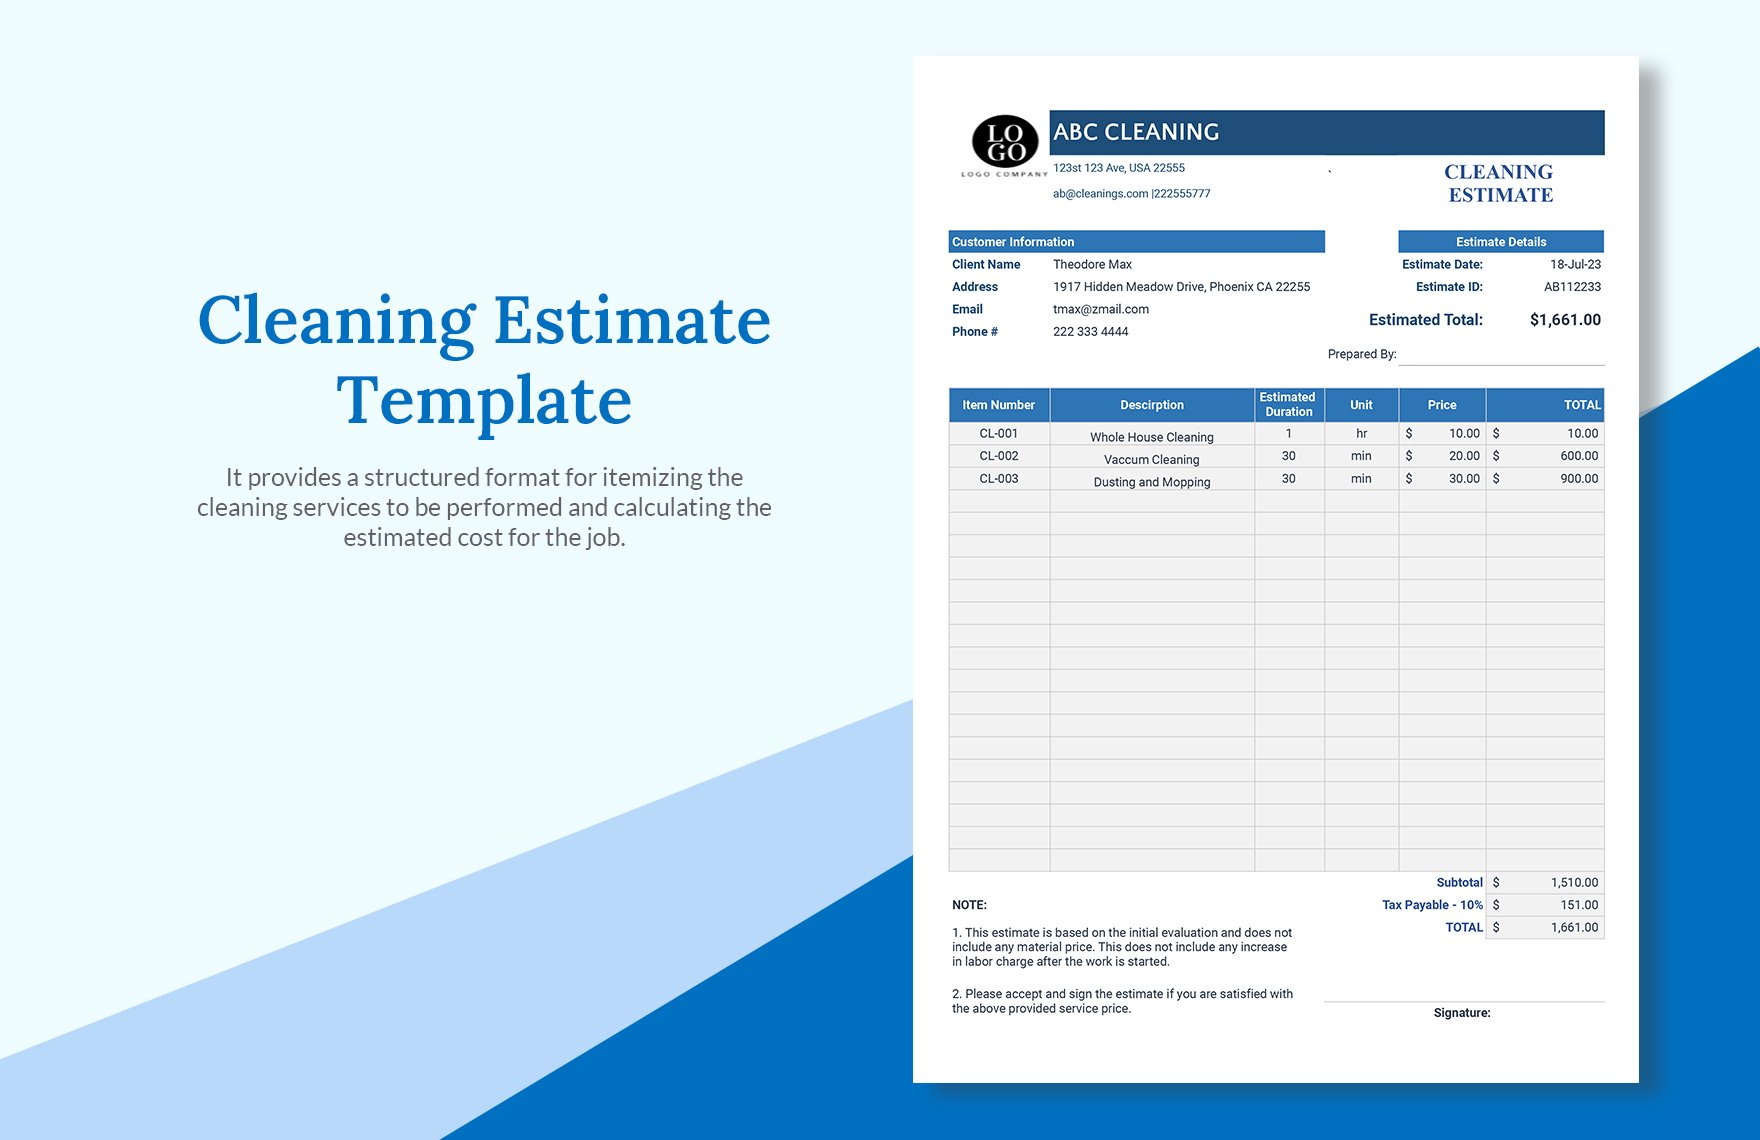 Window Cleaning Estimate Template Download in Word, Google Docs